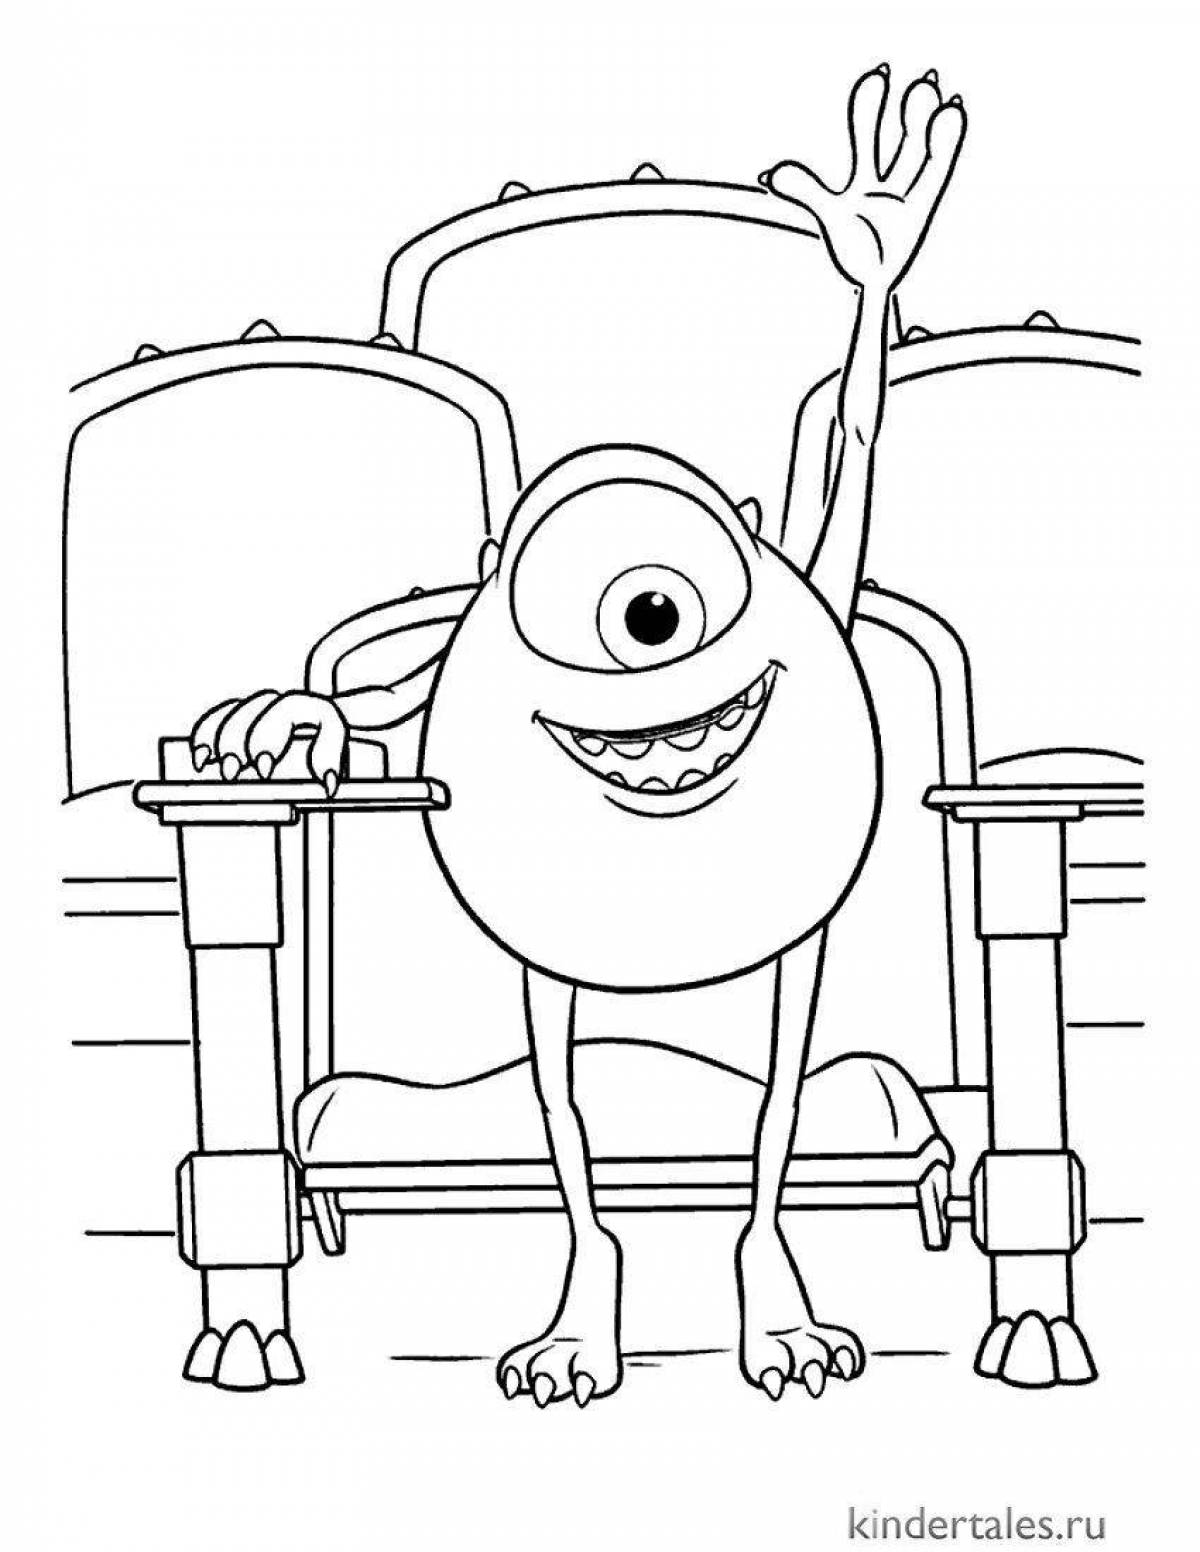 Coloring lively mike wazowski